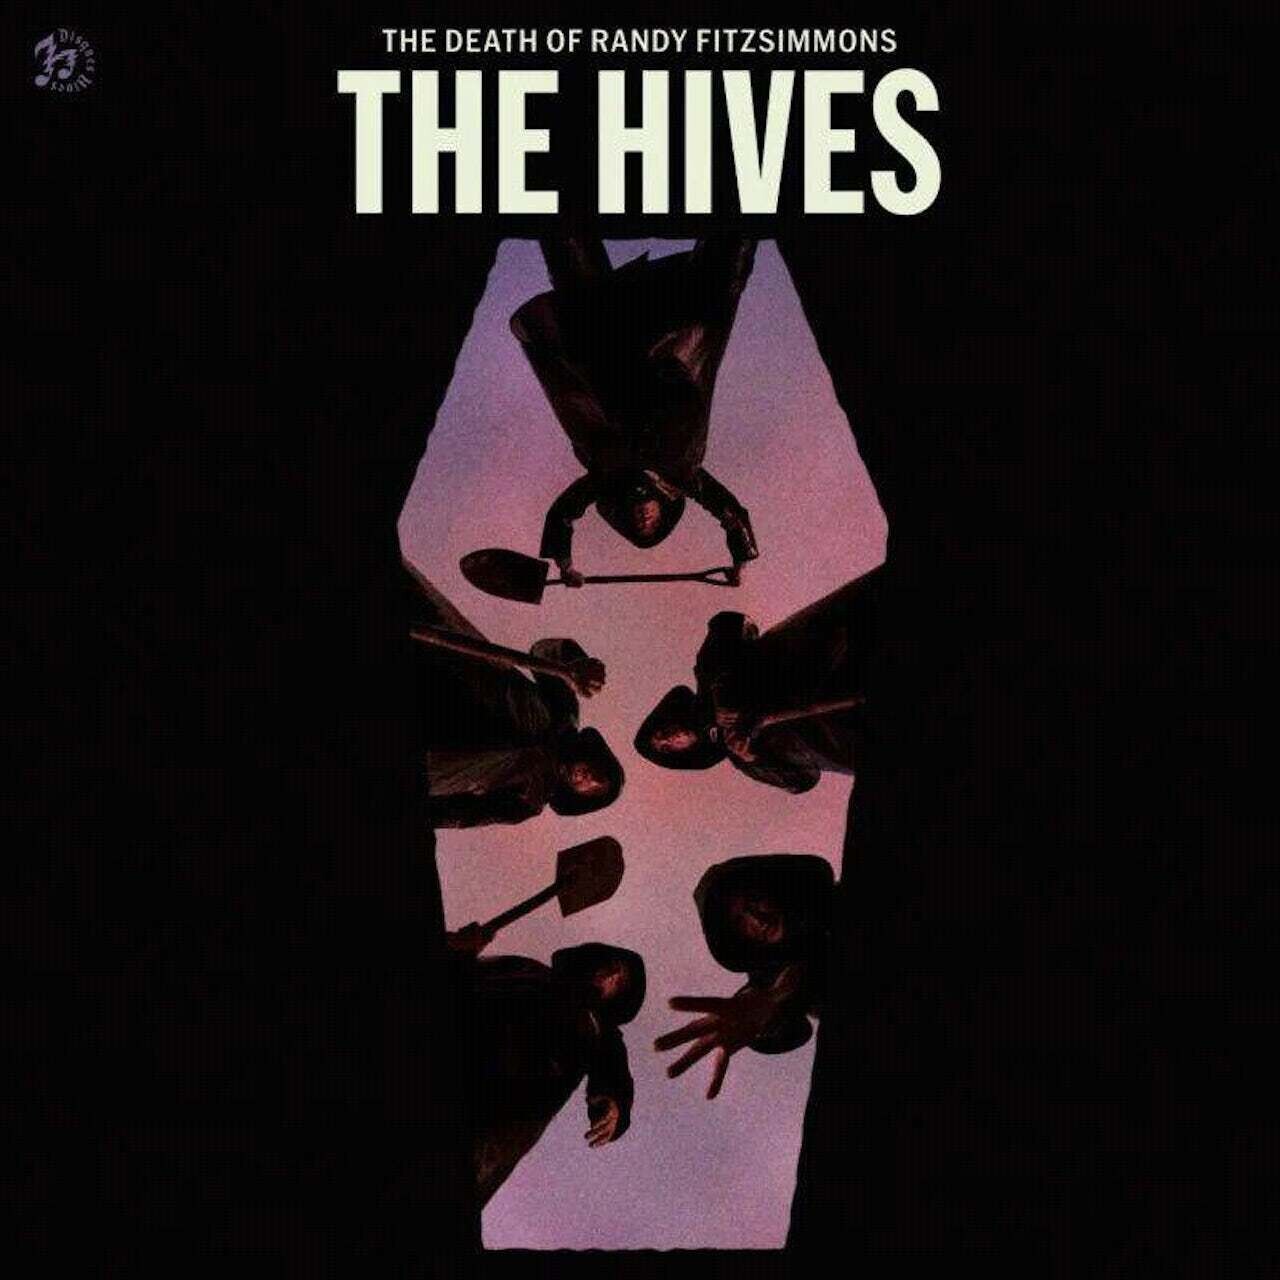 The Hives / The Death Of Randy Fitzsimmons INDEX